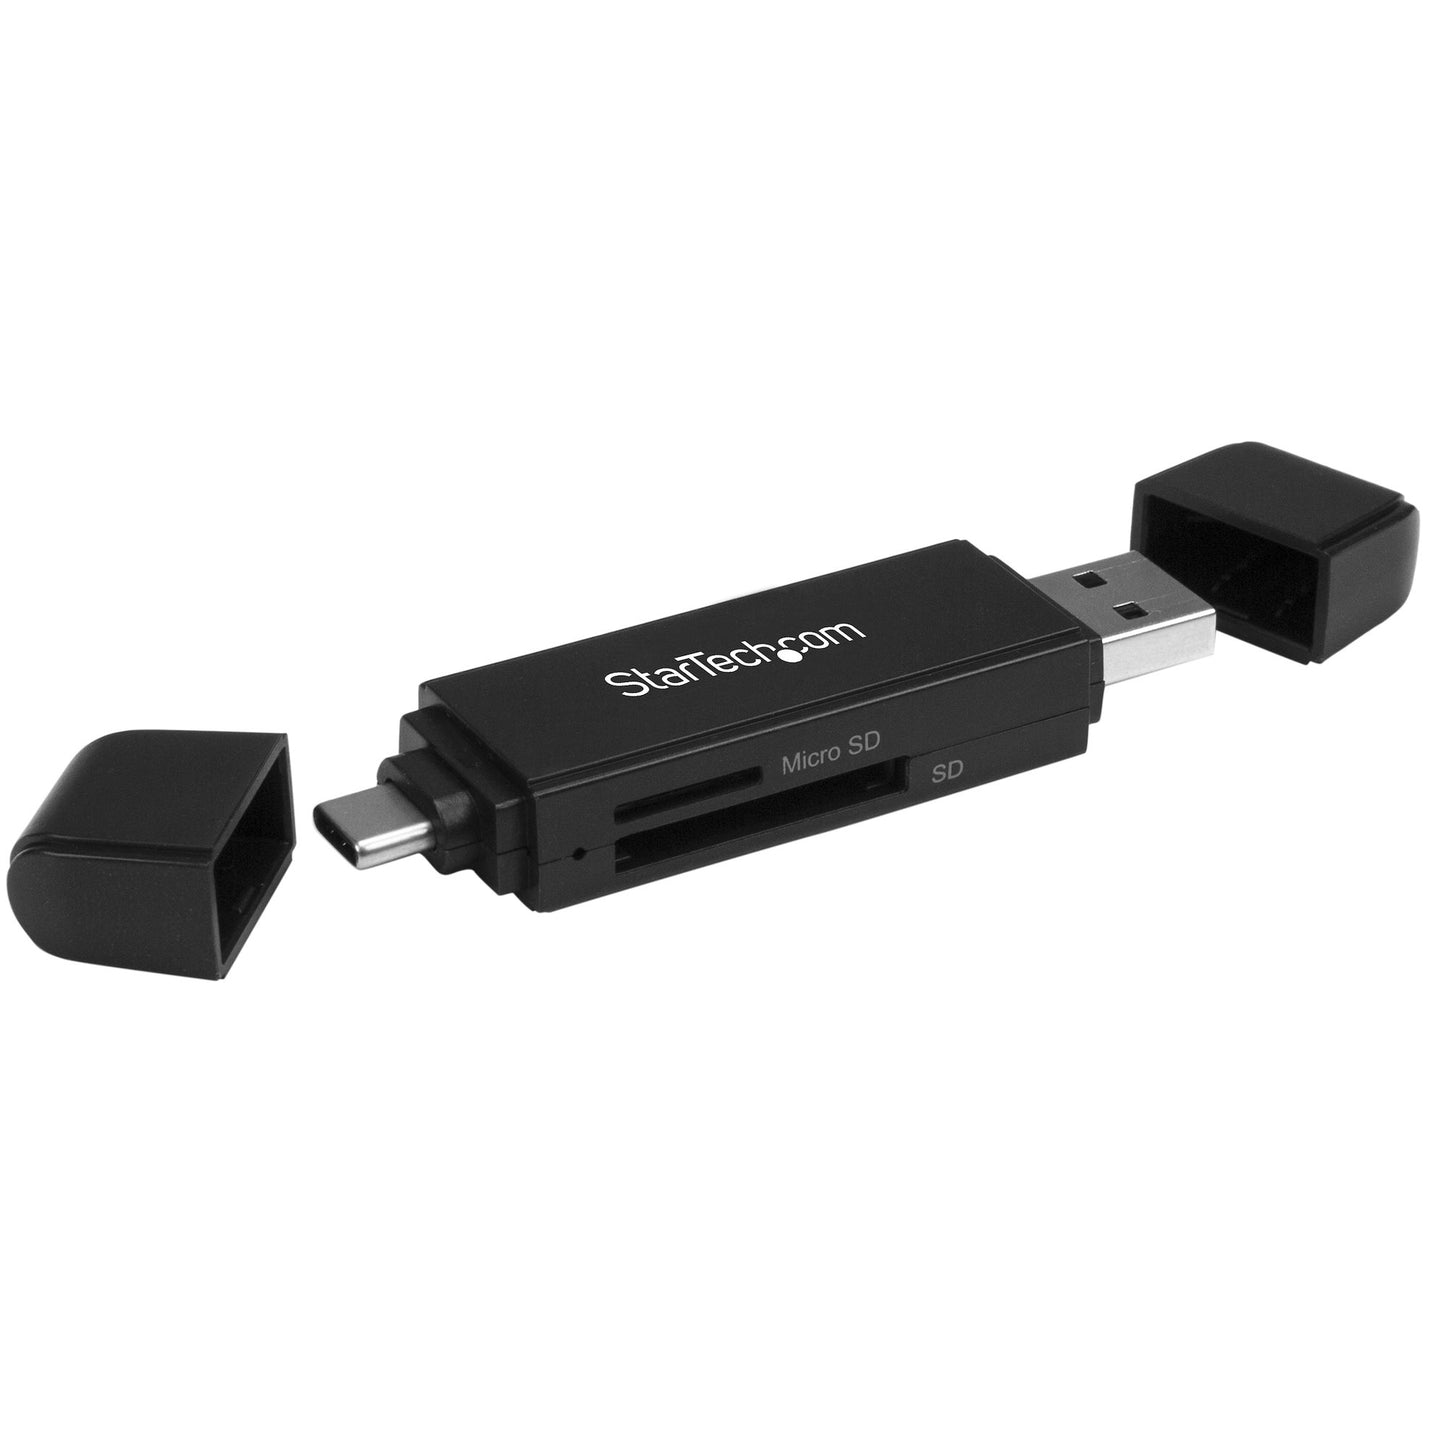 StarTech.com USB 3.0 Memory Card Reader/Writer for SD and microSD Cards - USB-C and USB-A-1